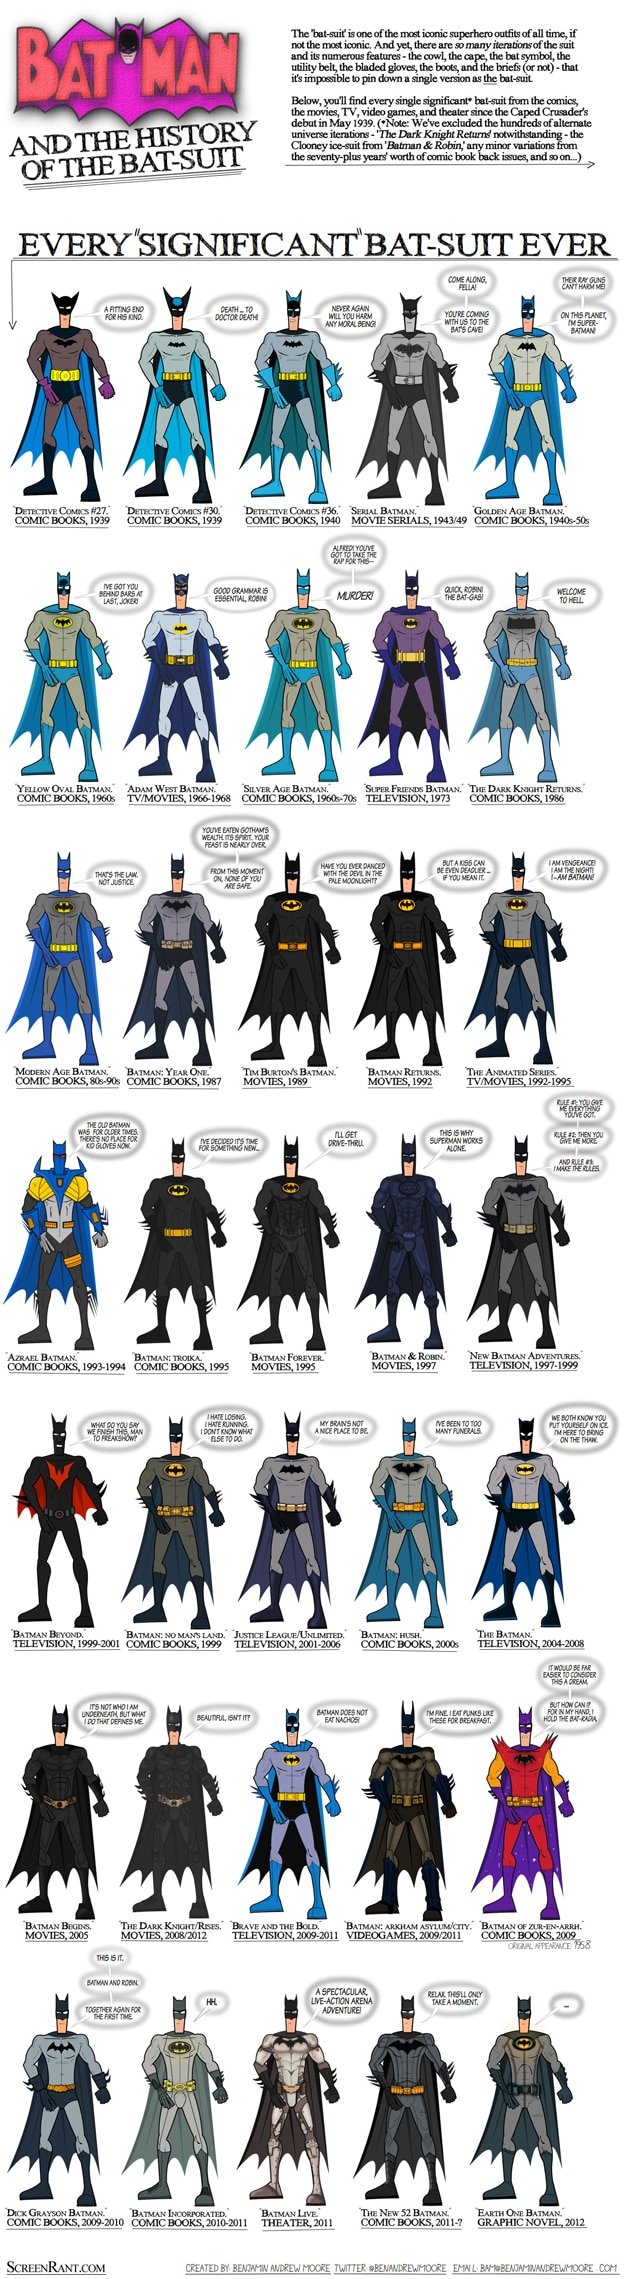 Every Significant Bat-Suit Ever Made [Chart]